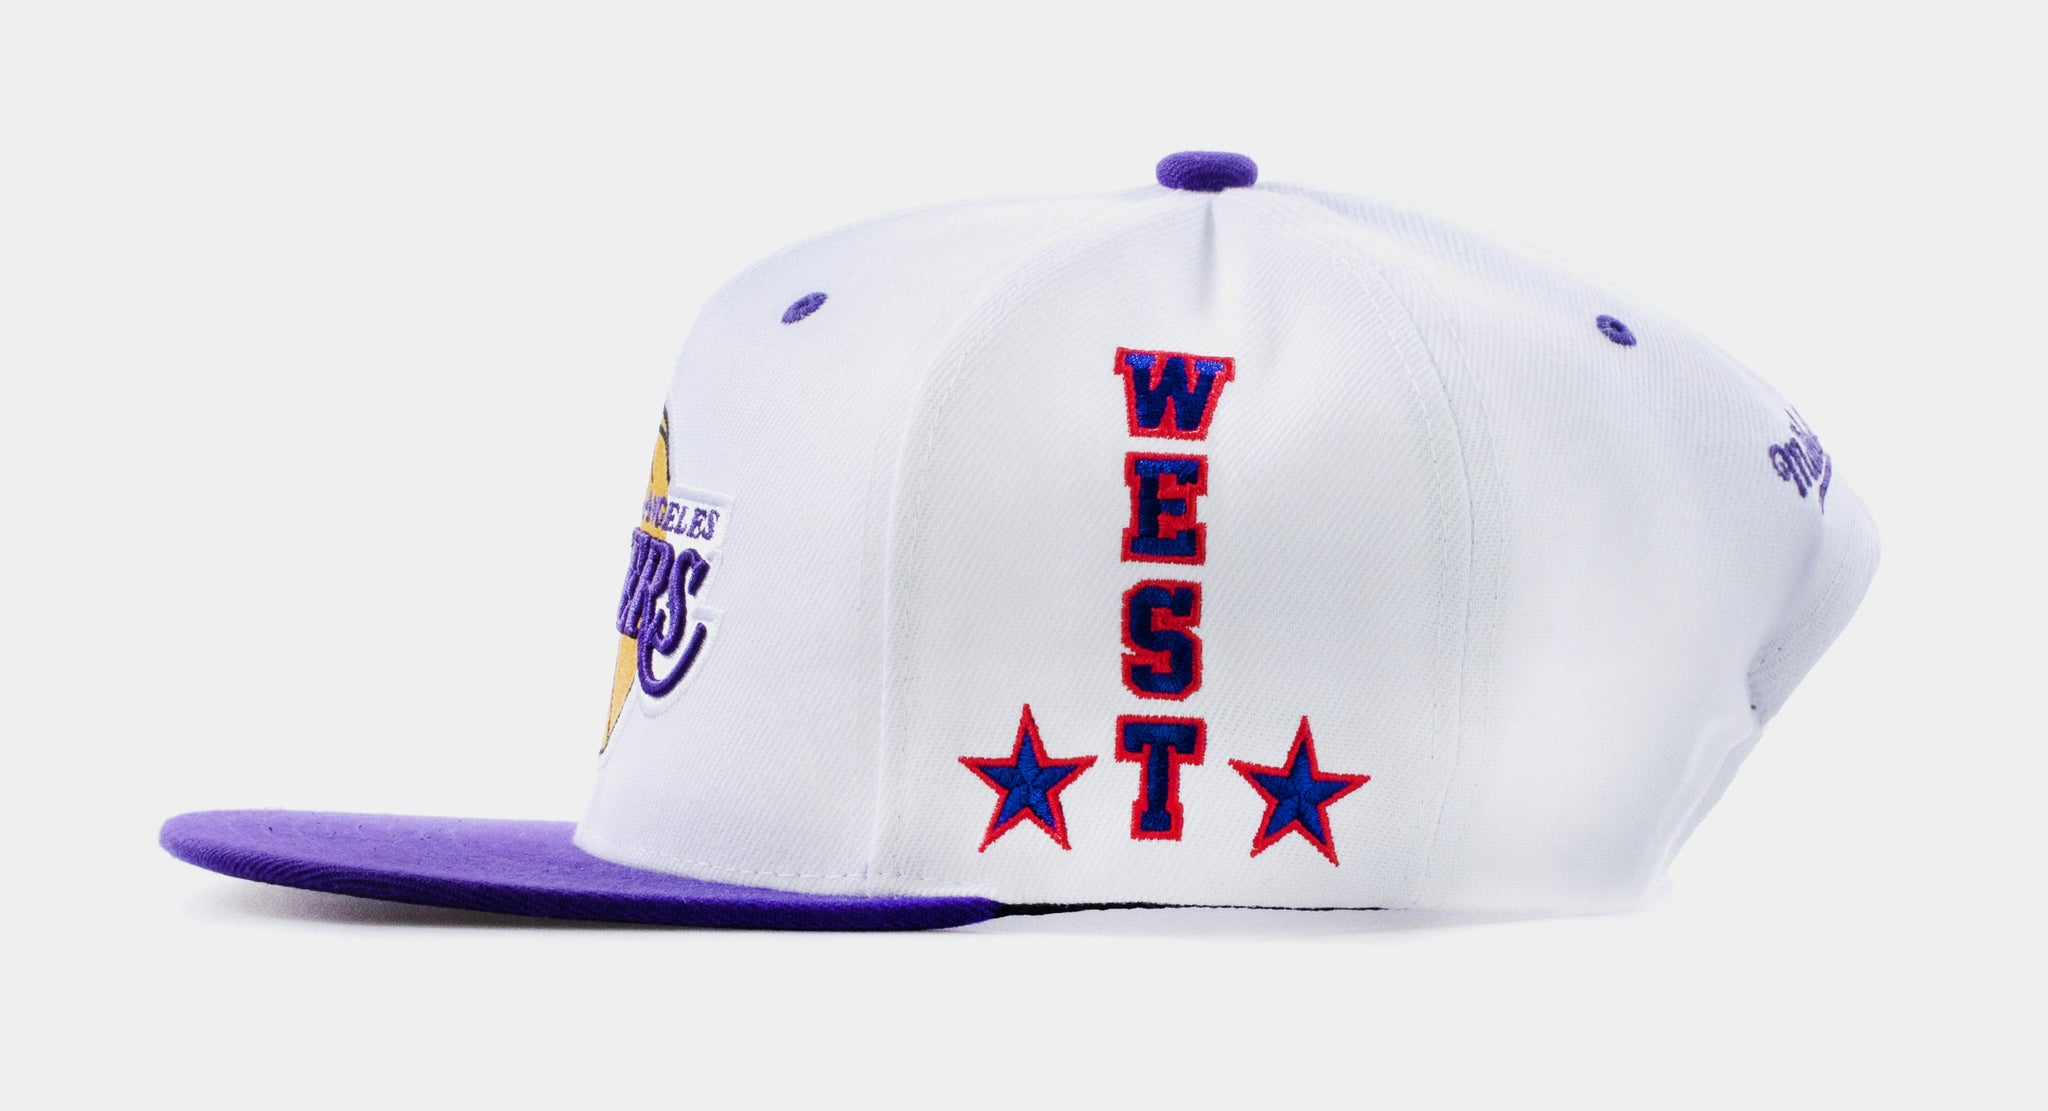 Los Angeles Lakers NBA White Mitchell & Ness Snapback hat cap